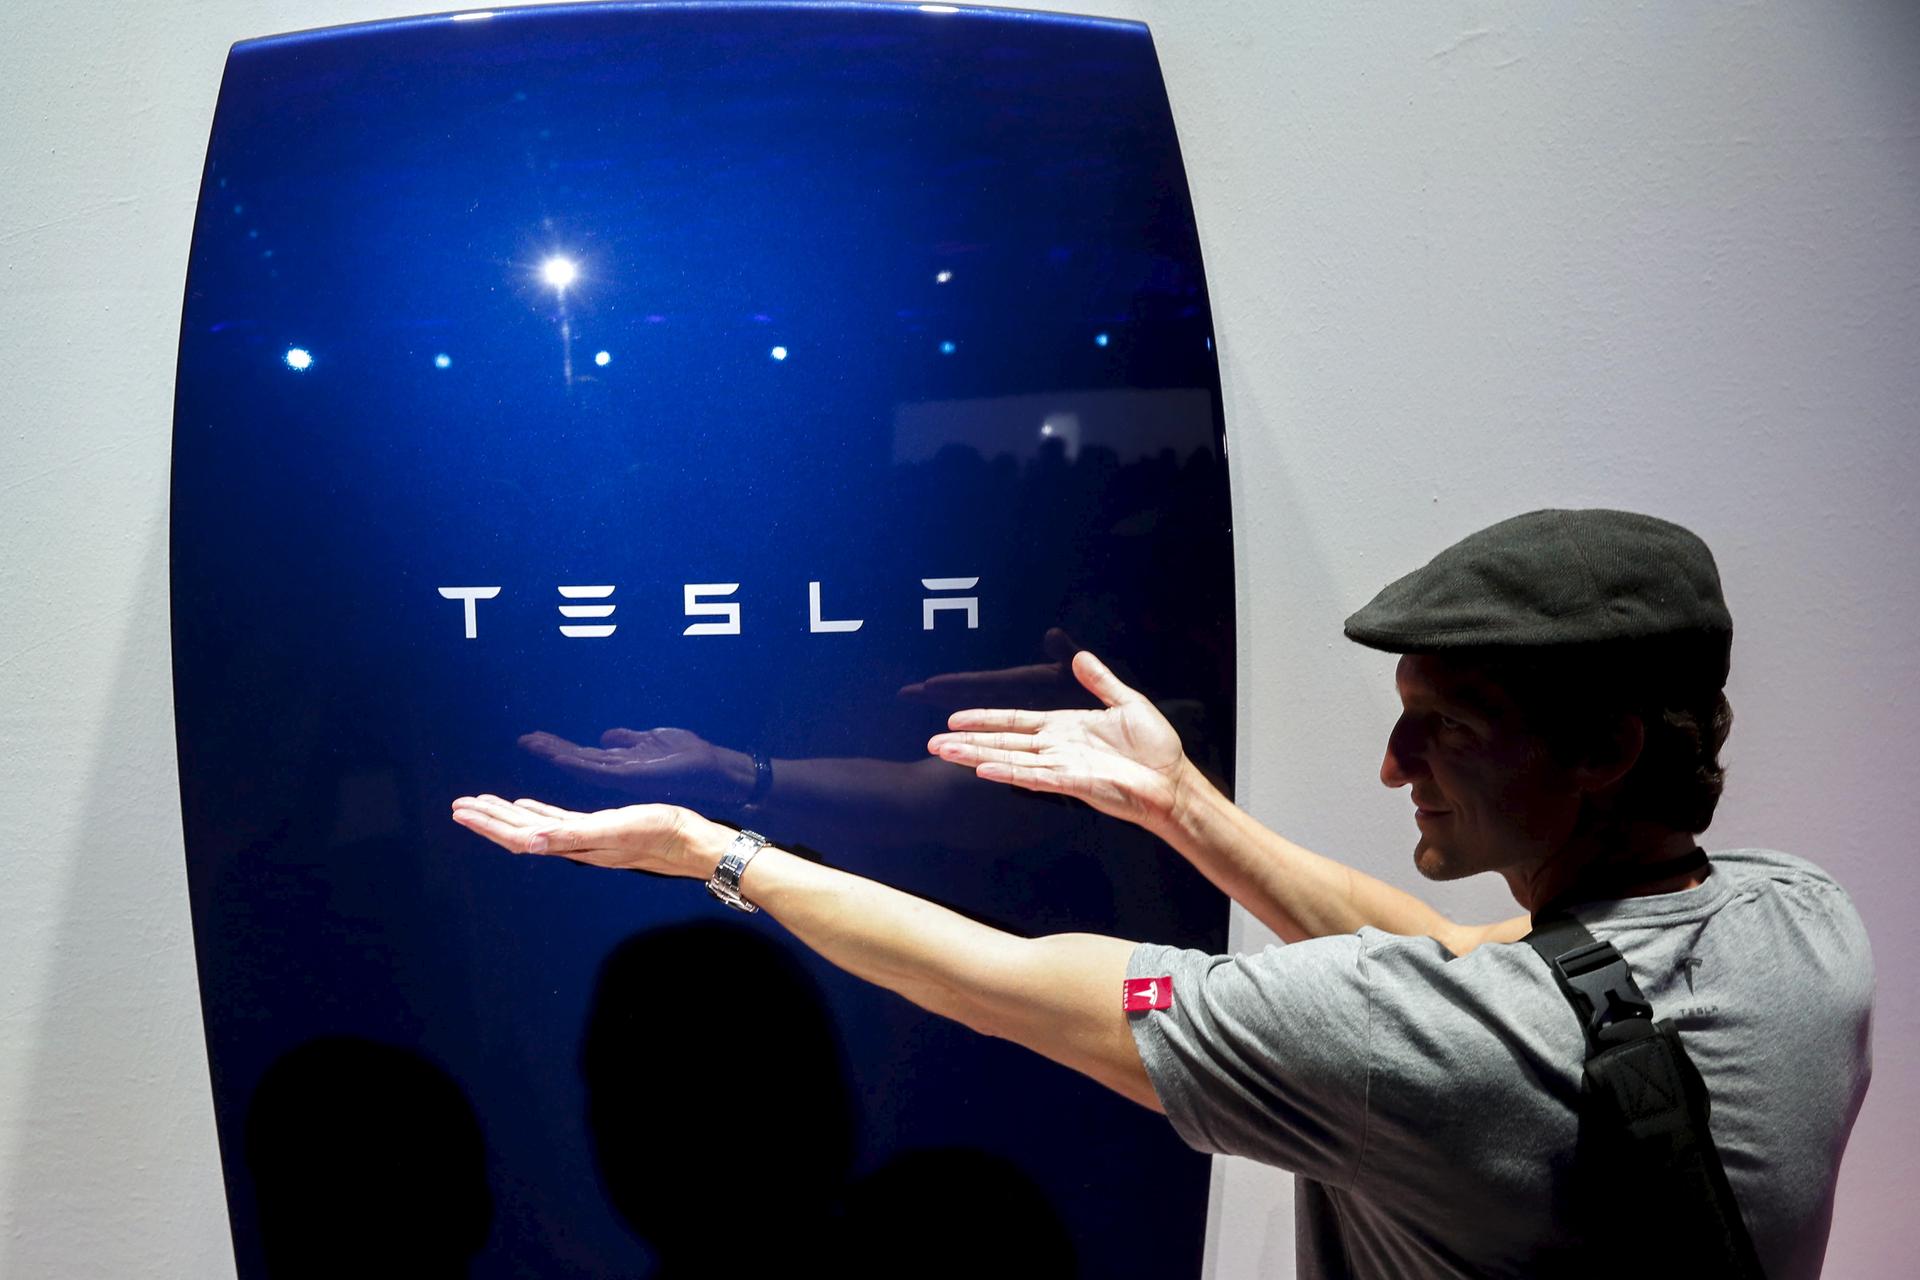 Attendees take pictures of the new Tesla Energy Powerwall Home Battery during an event at Tesla Motors in Hawthorne, California, on April 30, 2015.